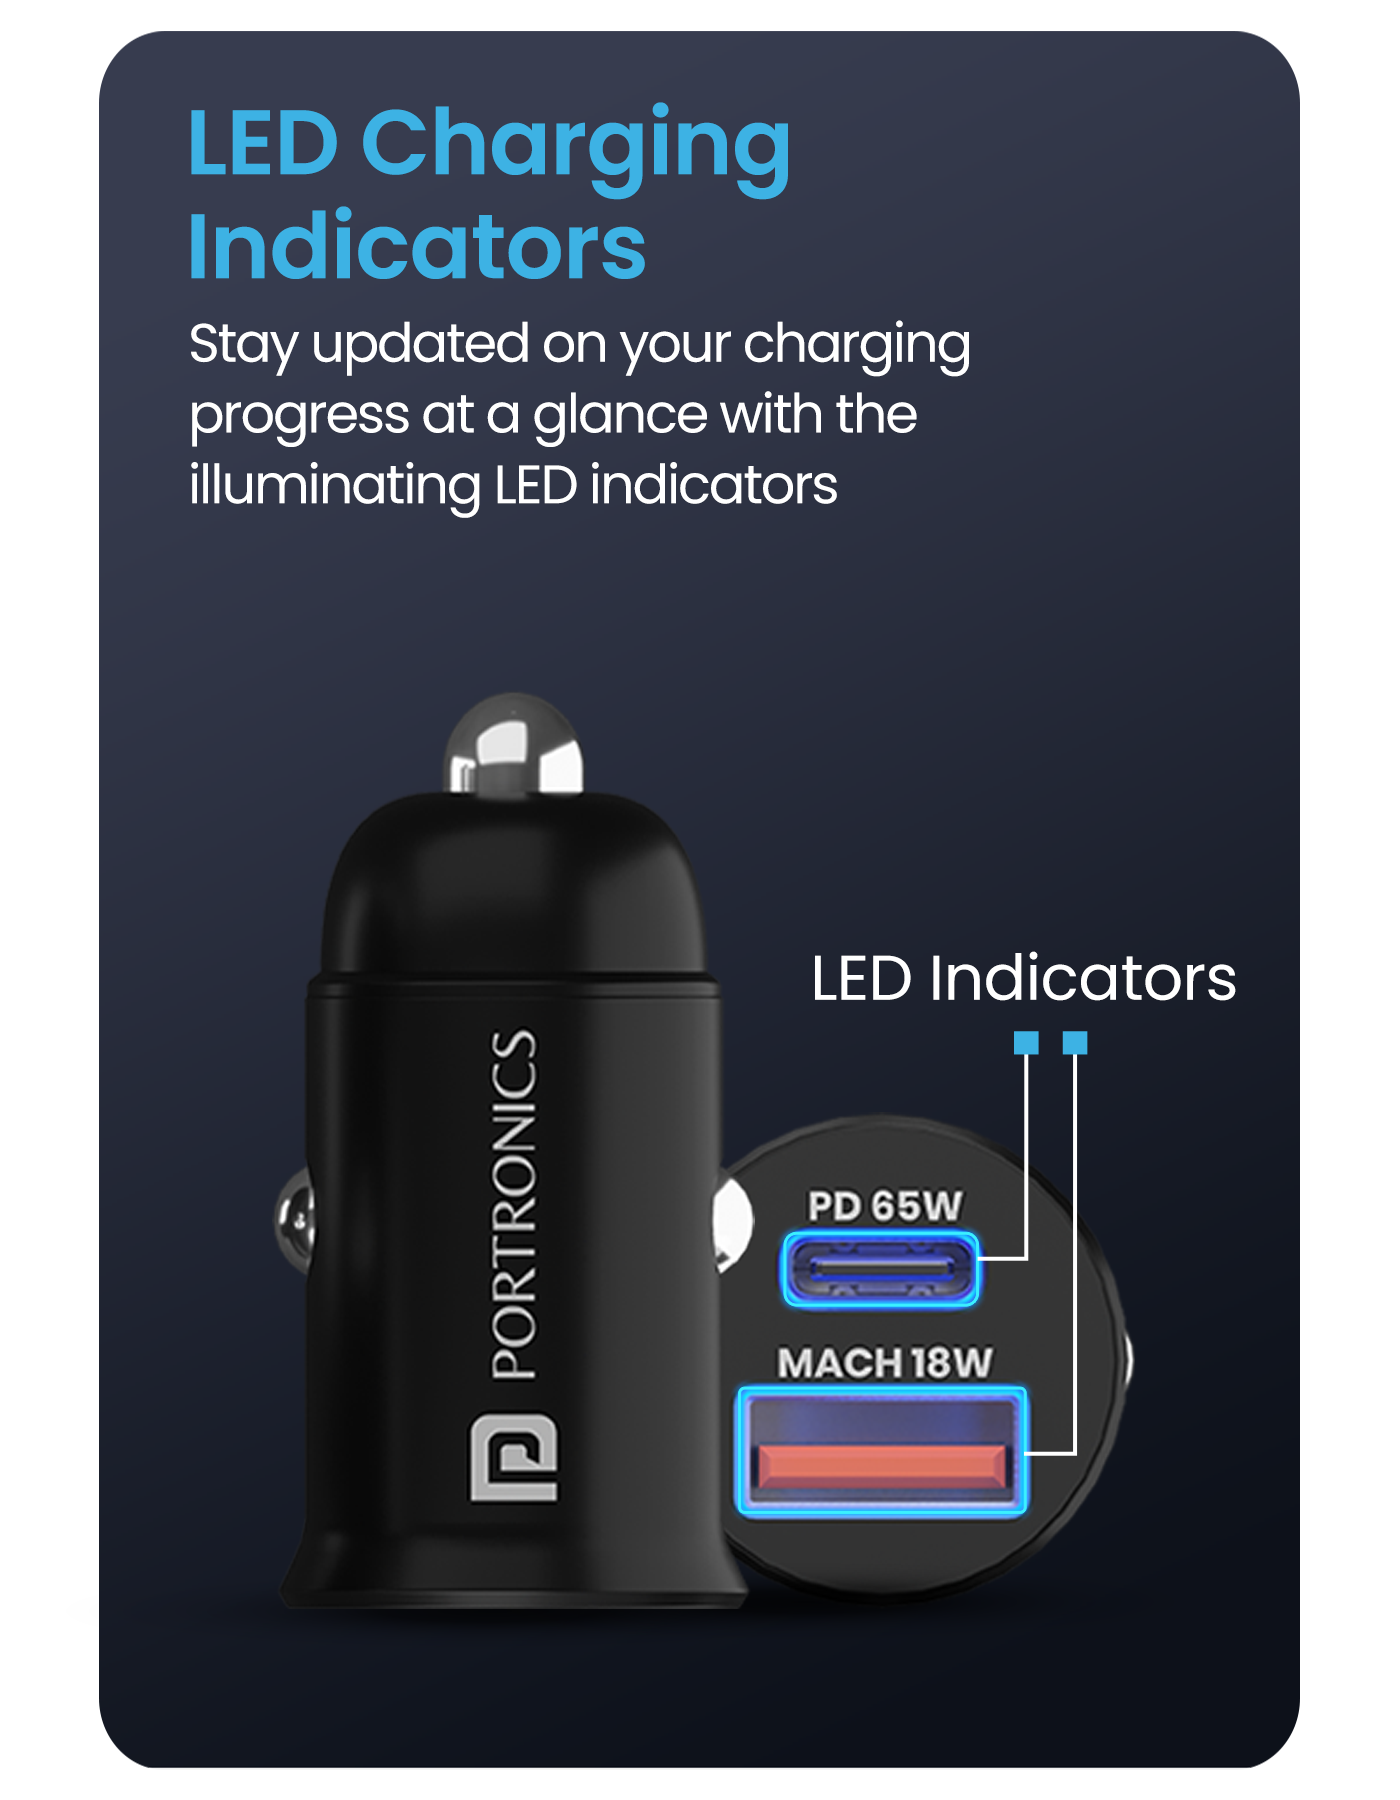 Portronics Car Power 65 car charger has led charging indicator to ensure safe charging | best car accessories| car charger online